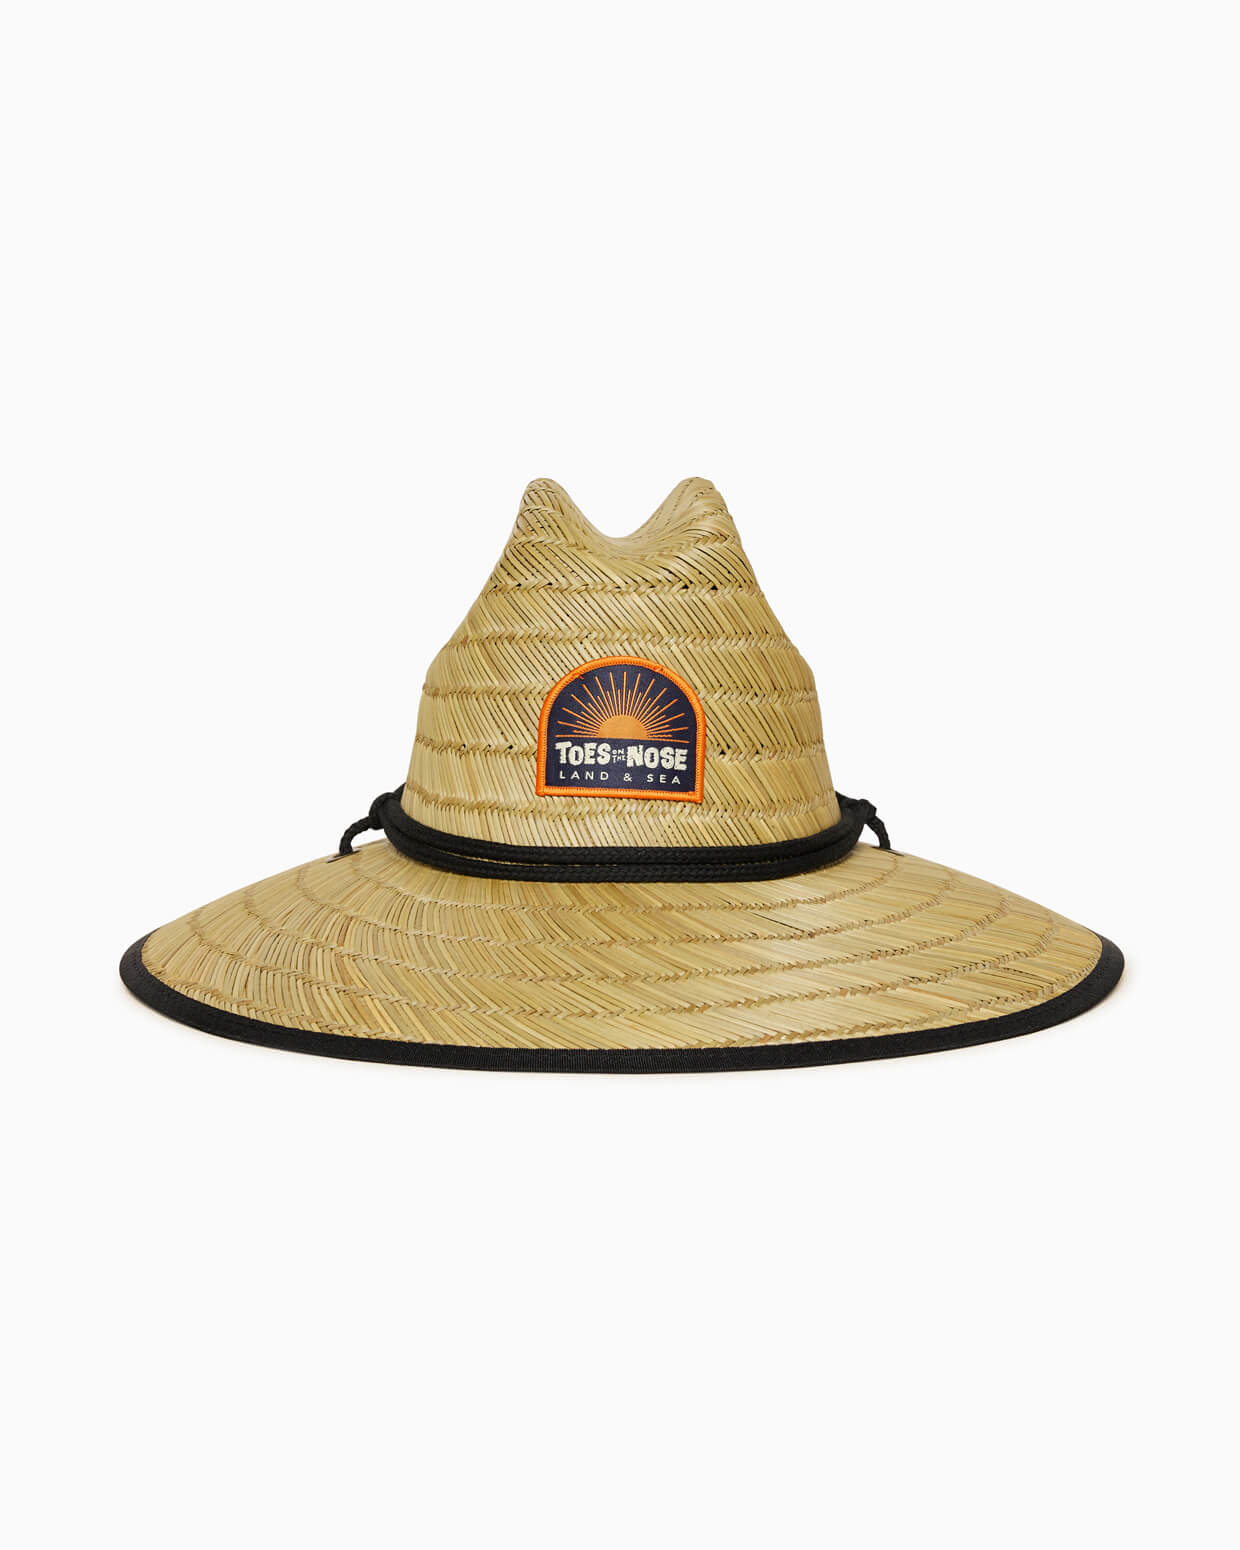 Toes On The Nose | Baja | Beach Hat OSFM | Size: Largeand and Sea